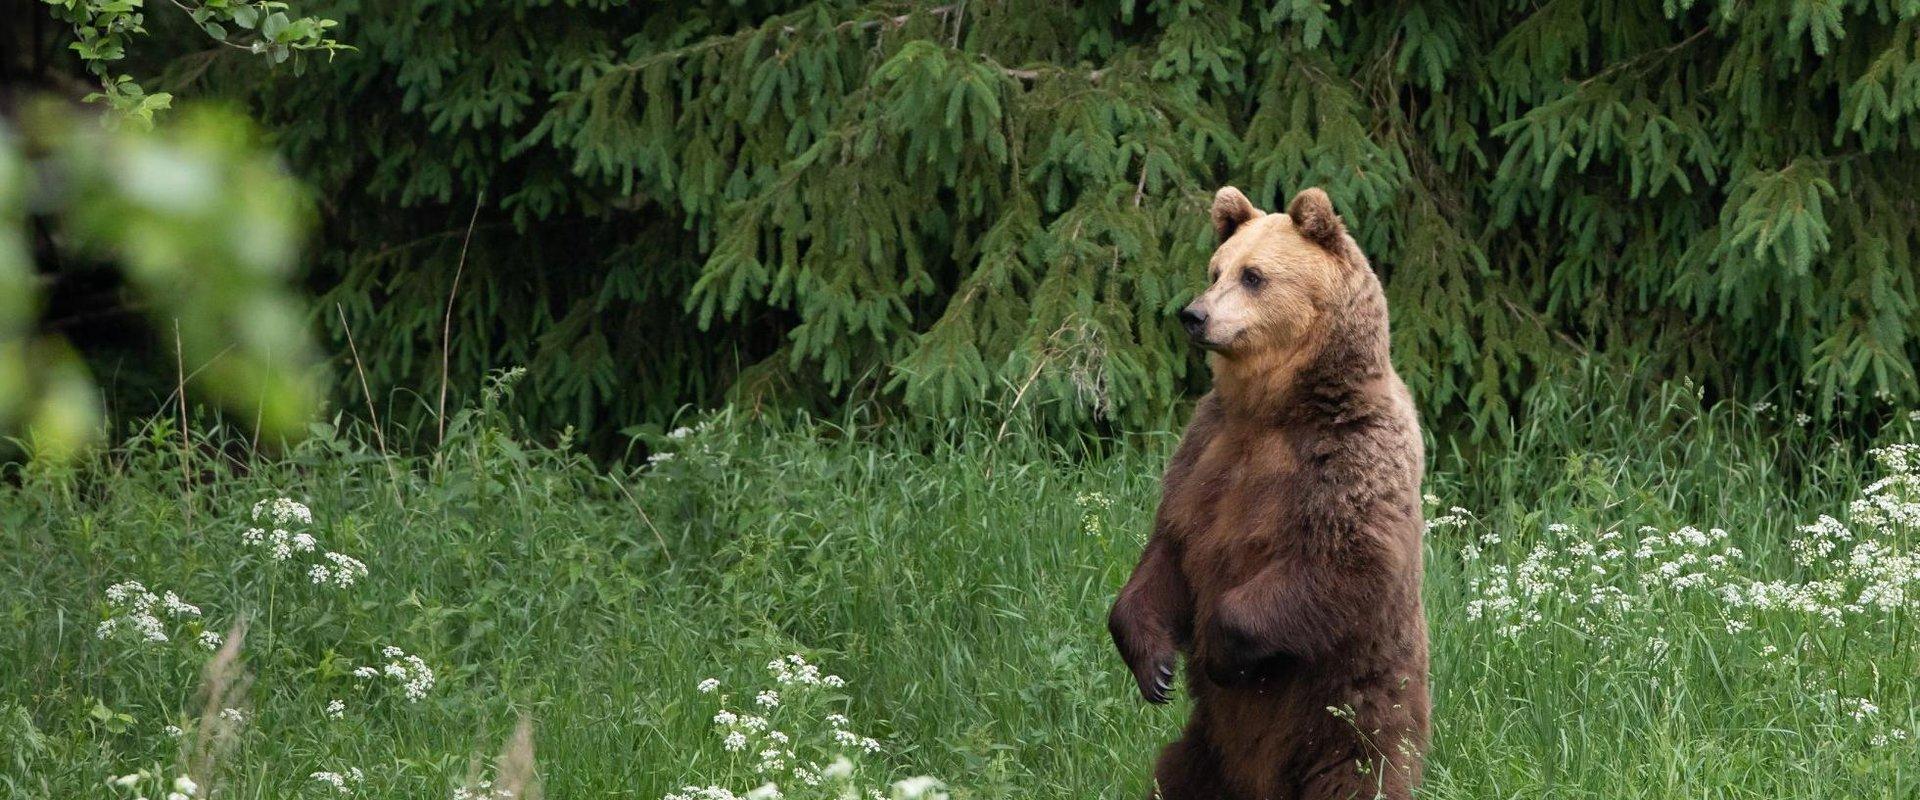 Have you ever seen a bear with your own eyes? Now is your chance! It is most likely to see bears in a small group and the huts are designed for 2–3 pe